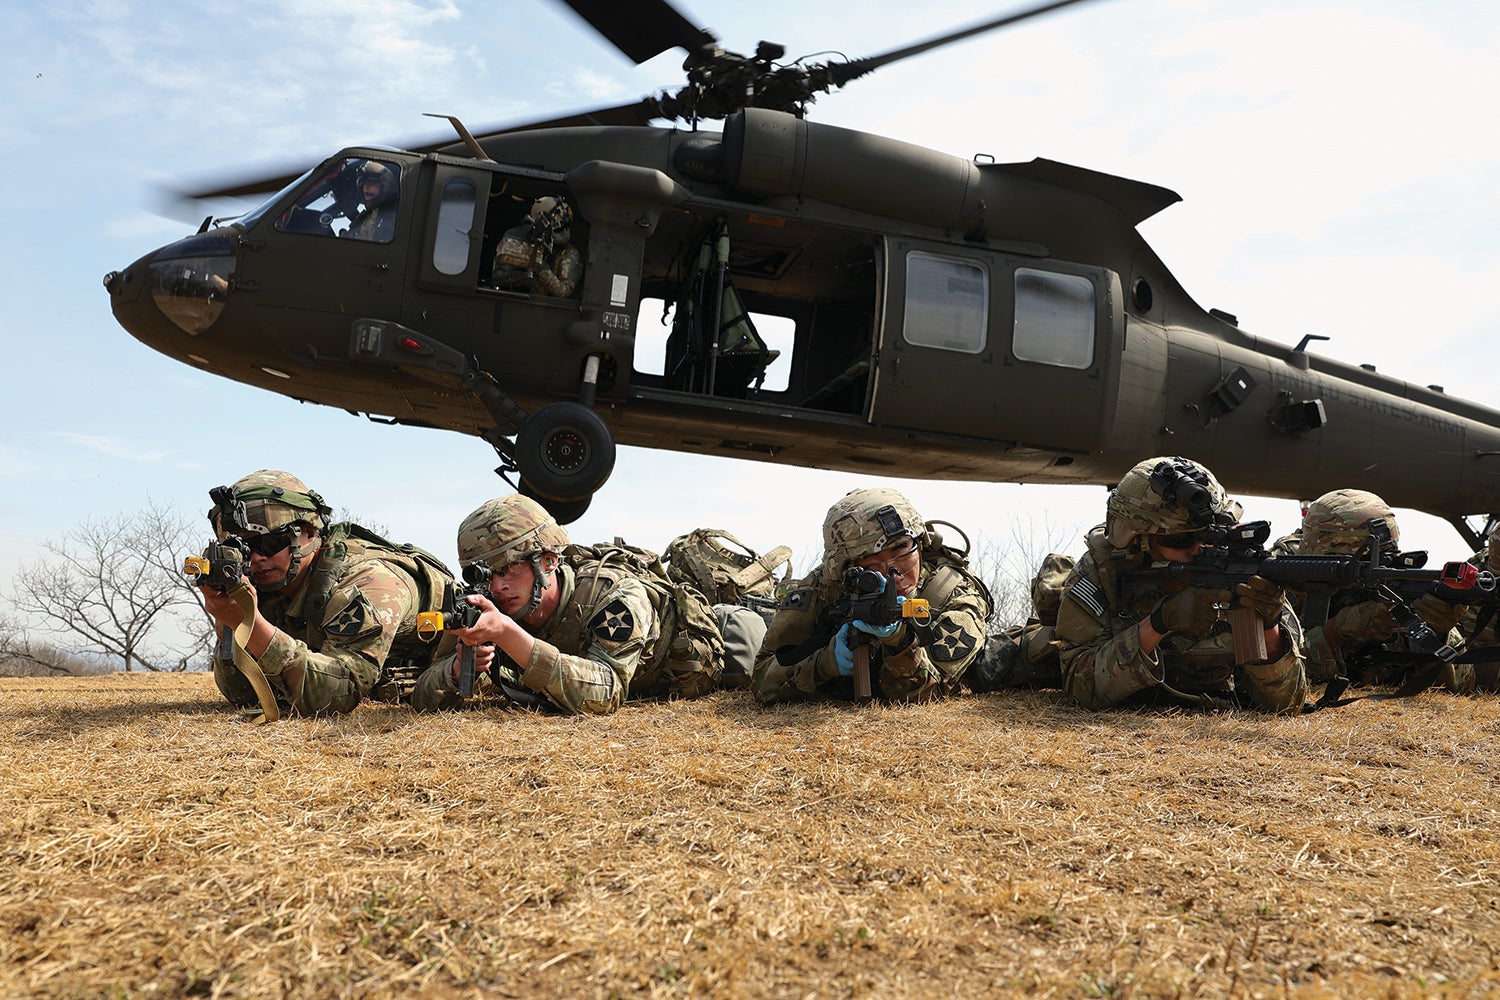 Soldiers with the 2nd Stryker Brigade Combat Team, 2nd Infantry Division, exit a UH-60M Black Hawk helicopter during an exercise in South Korea. (Credit: U.S. Army/Capt. Frank Spatt)